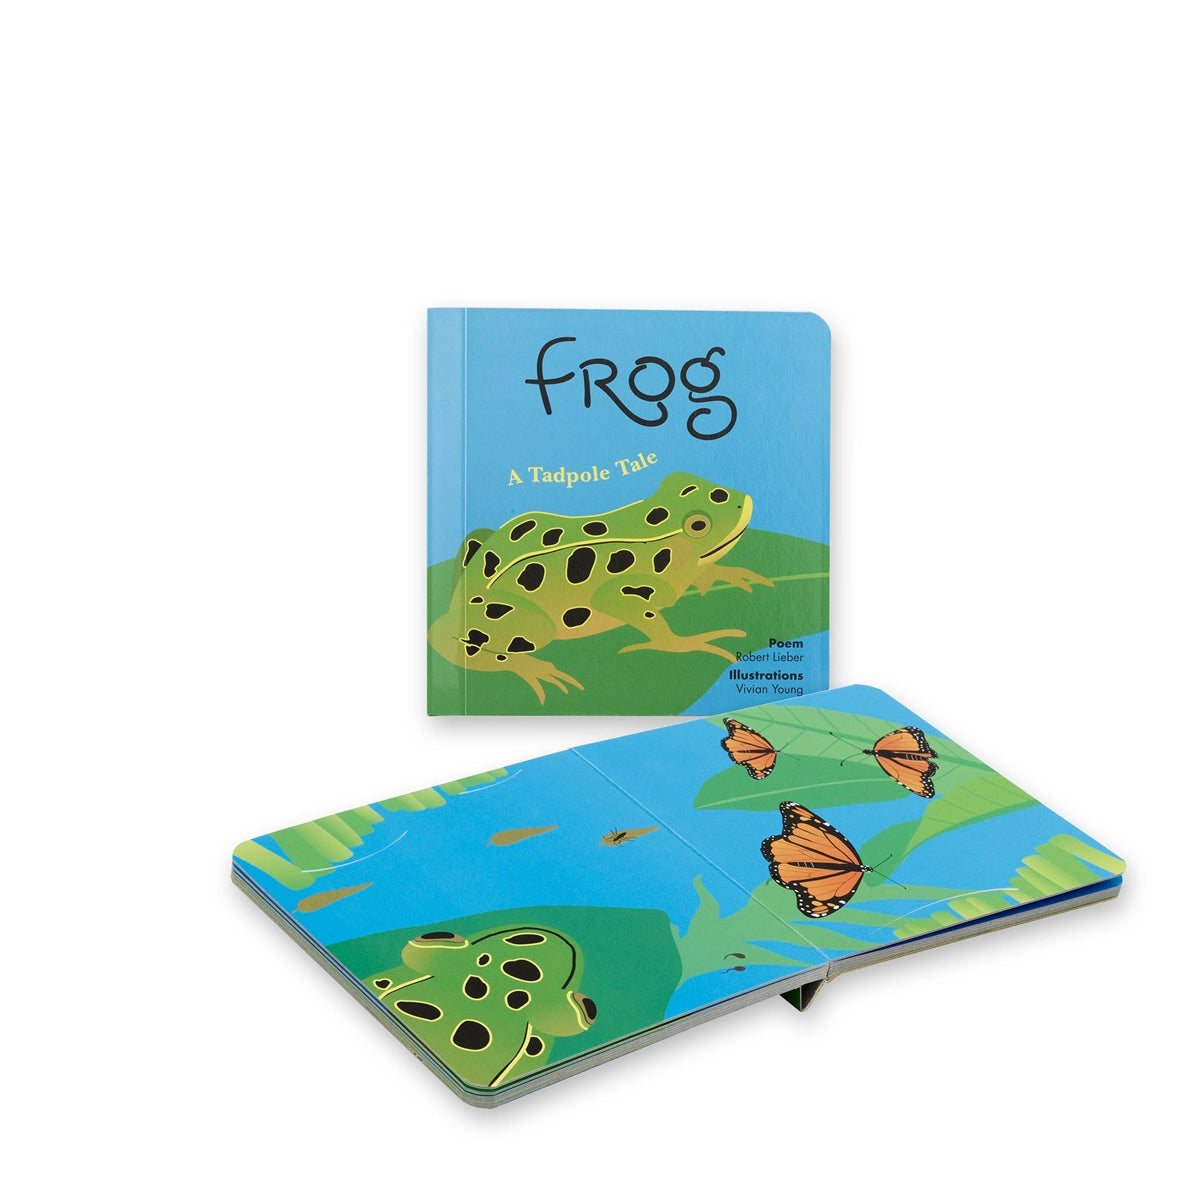 Butterfly and Frog board book with poem by Robert Lieber, story of California wildlife.